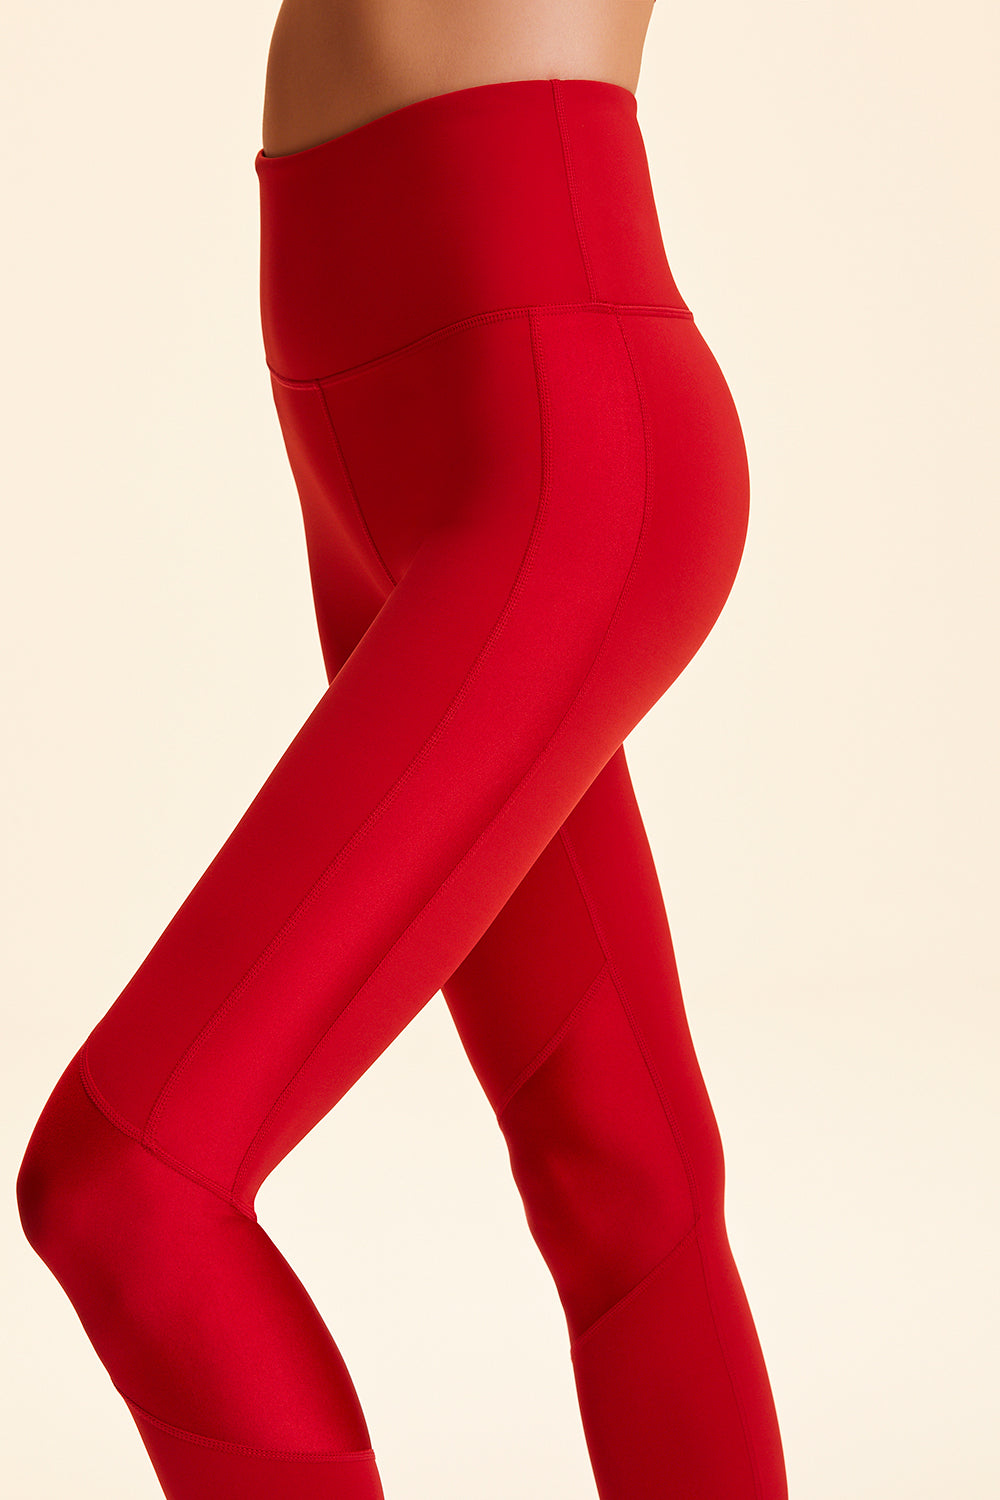 Side view of Alala Women's Luxury Athleisure red tight